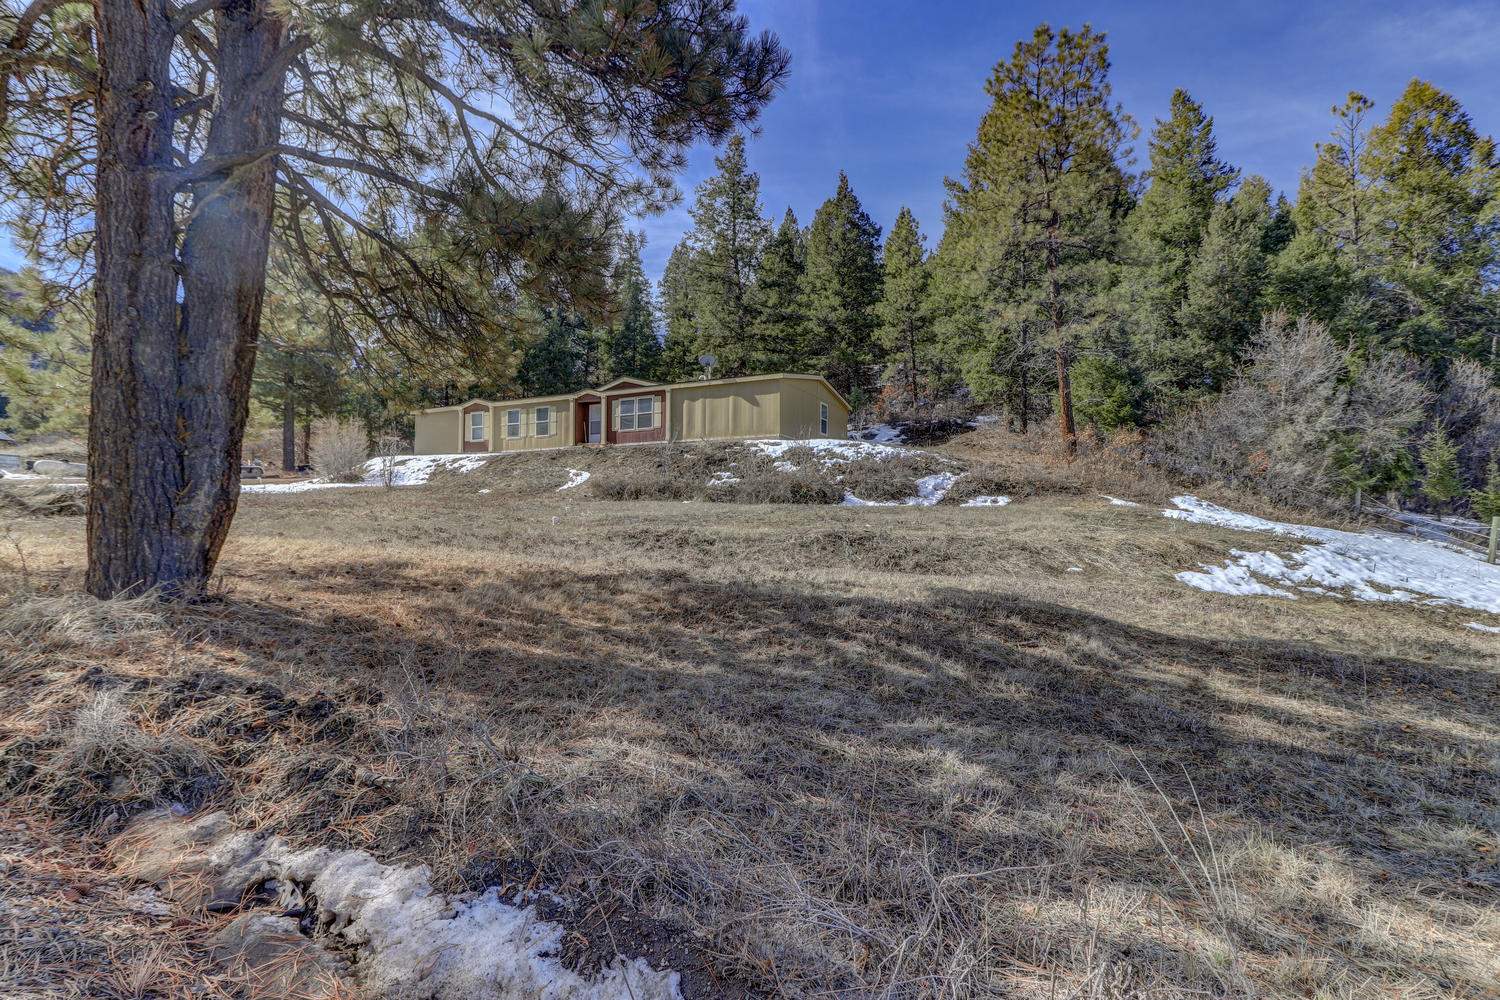 187 WEASEL Drive, Pagosa Springs, CO 81147